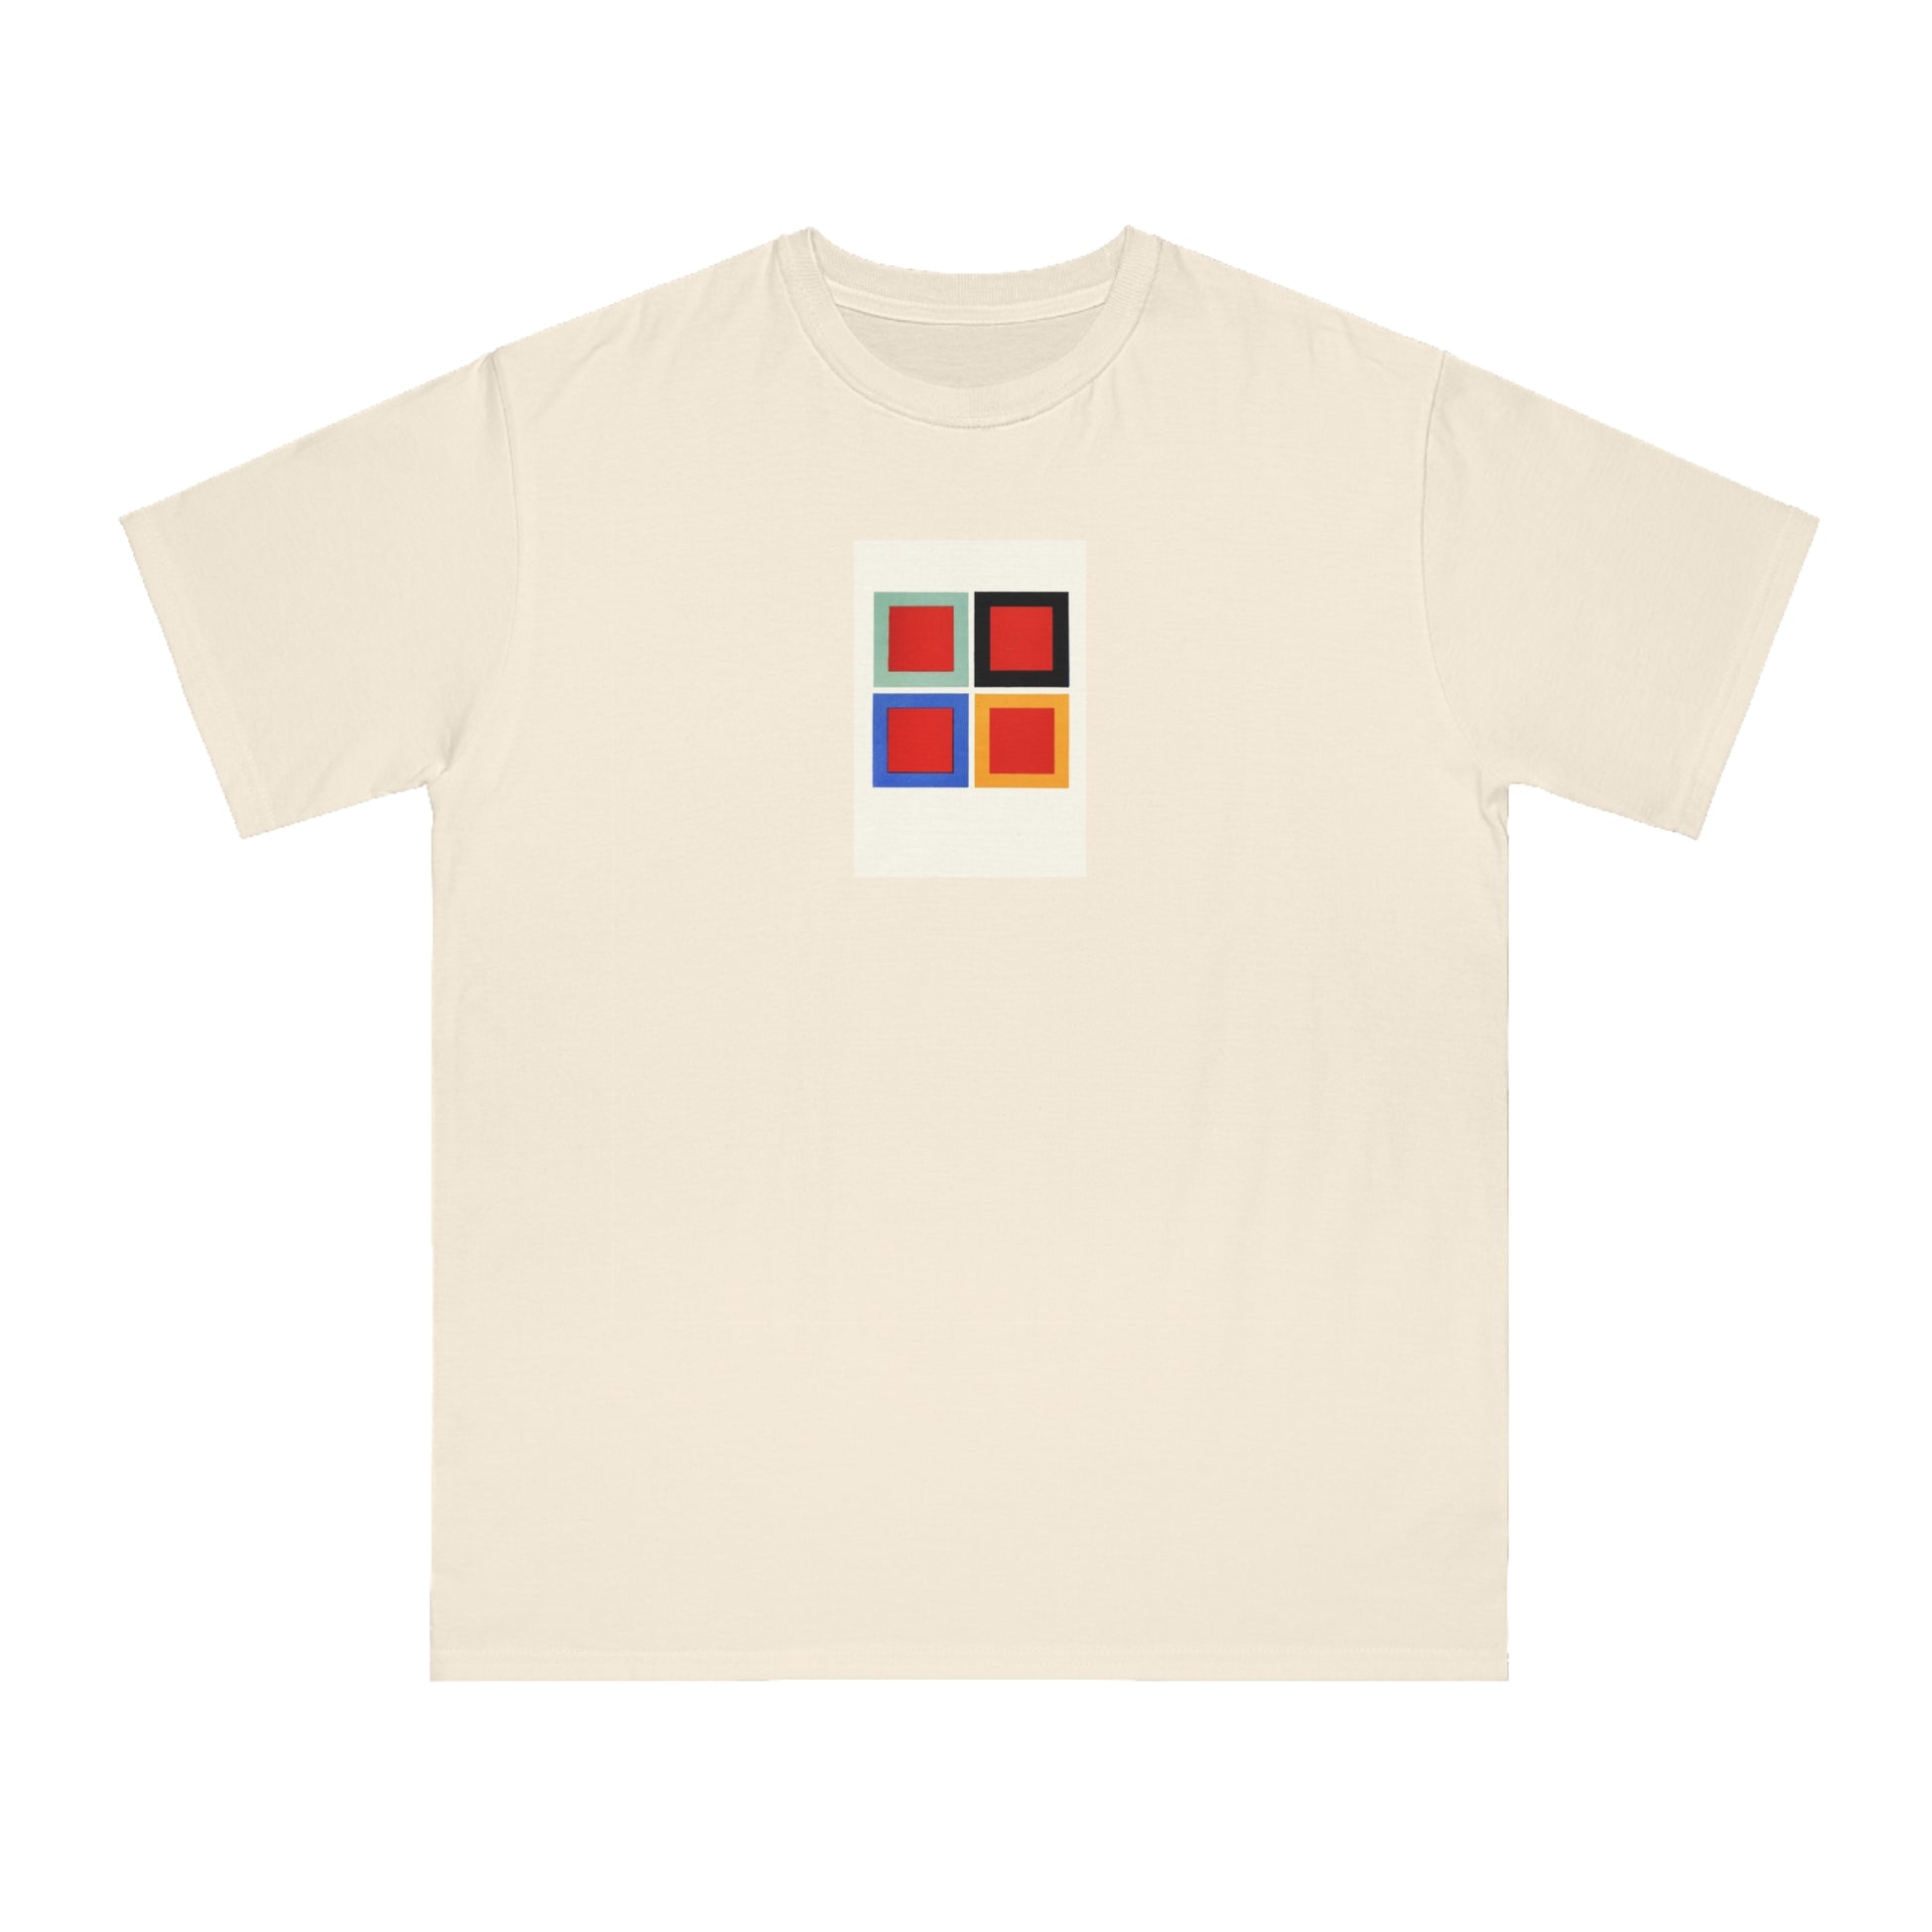 a white t - shirt with a red, orange, and blue square on the